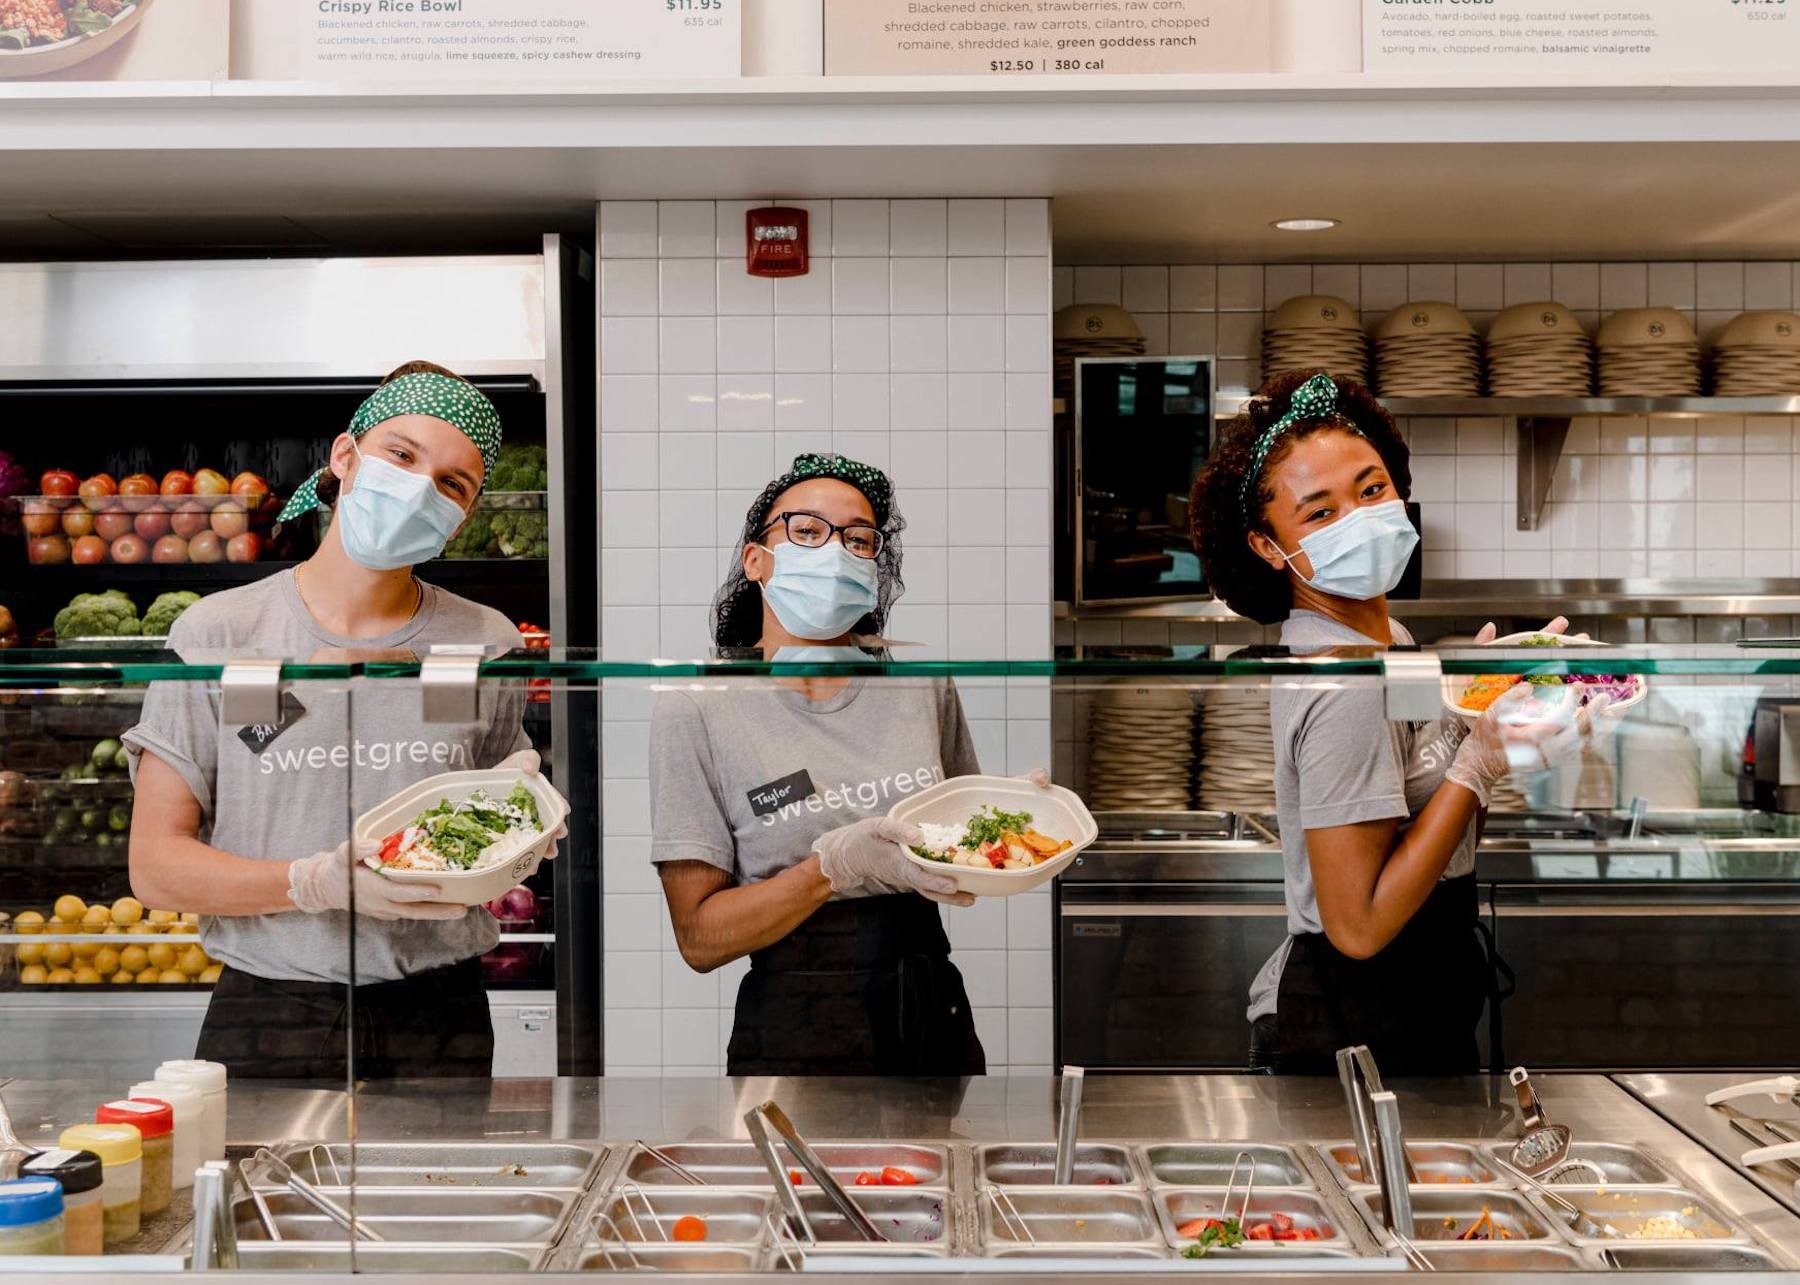 Three Sweetgreen workers stand behind the counter and hold up bowls of food.